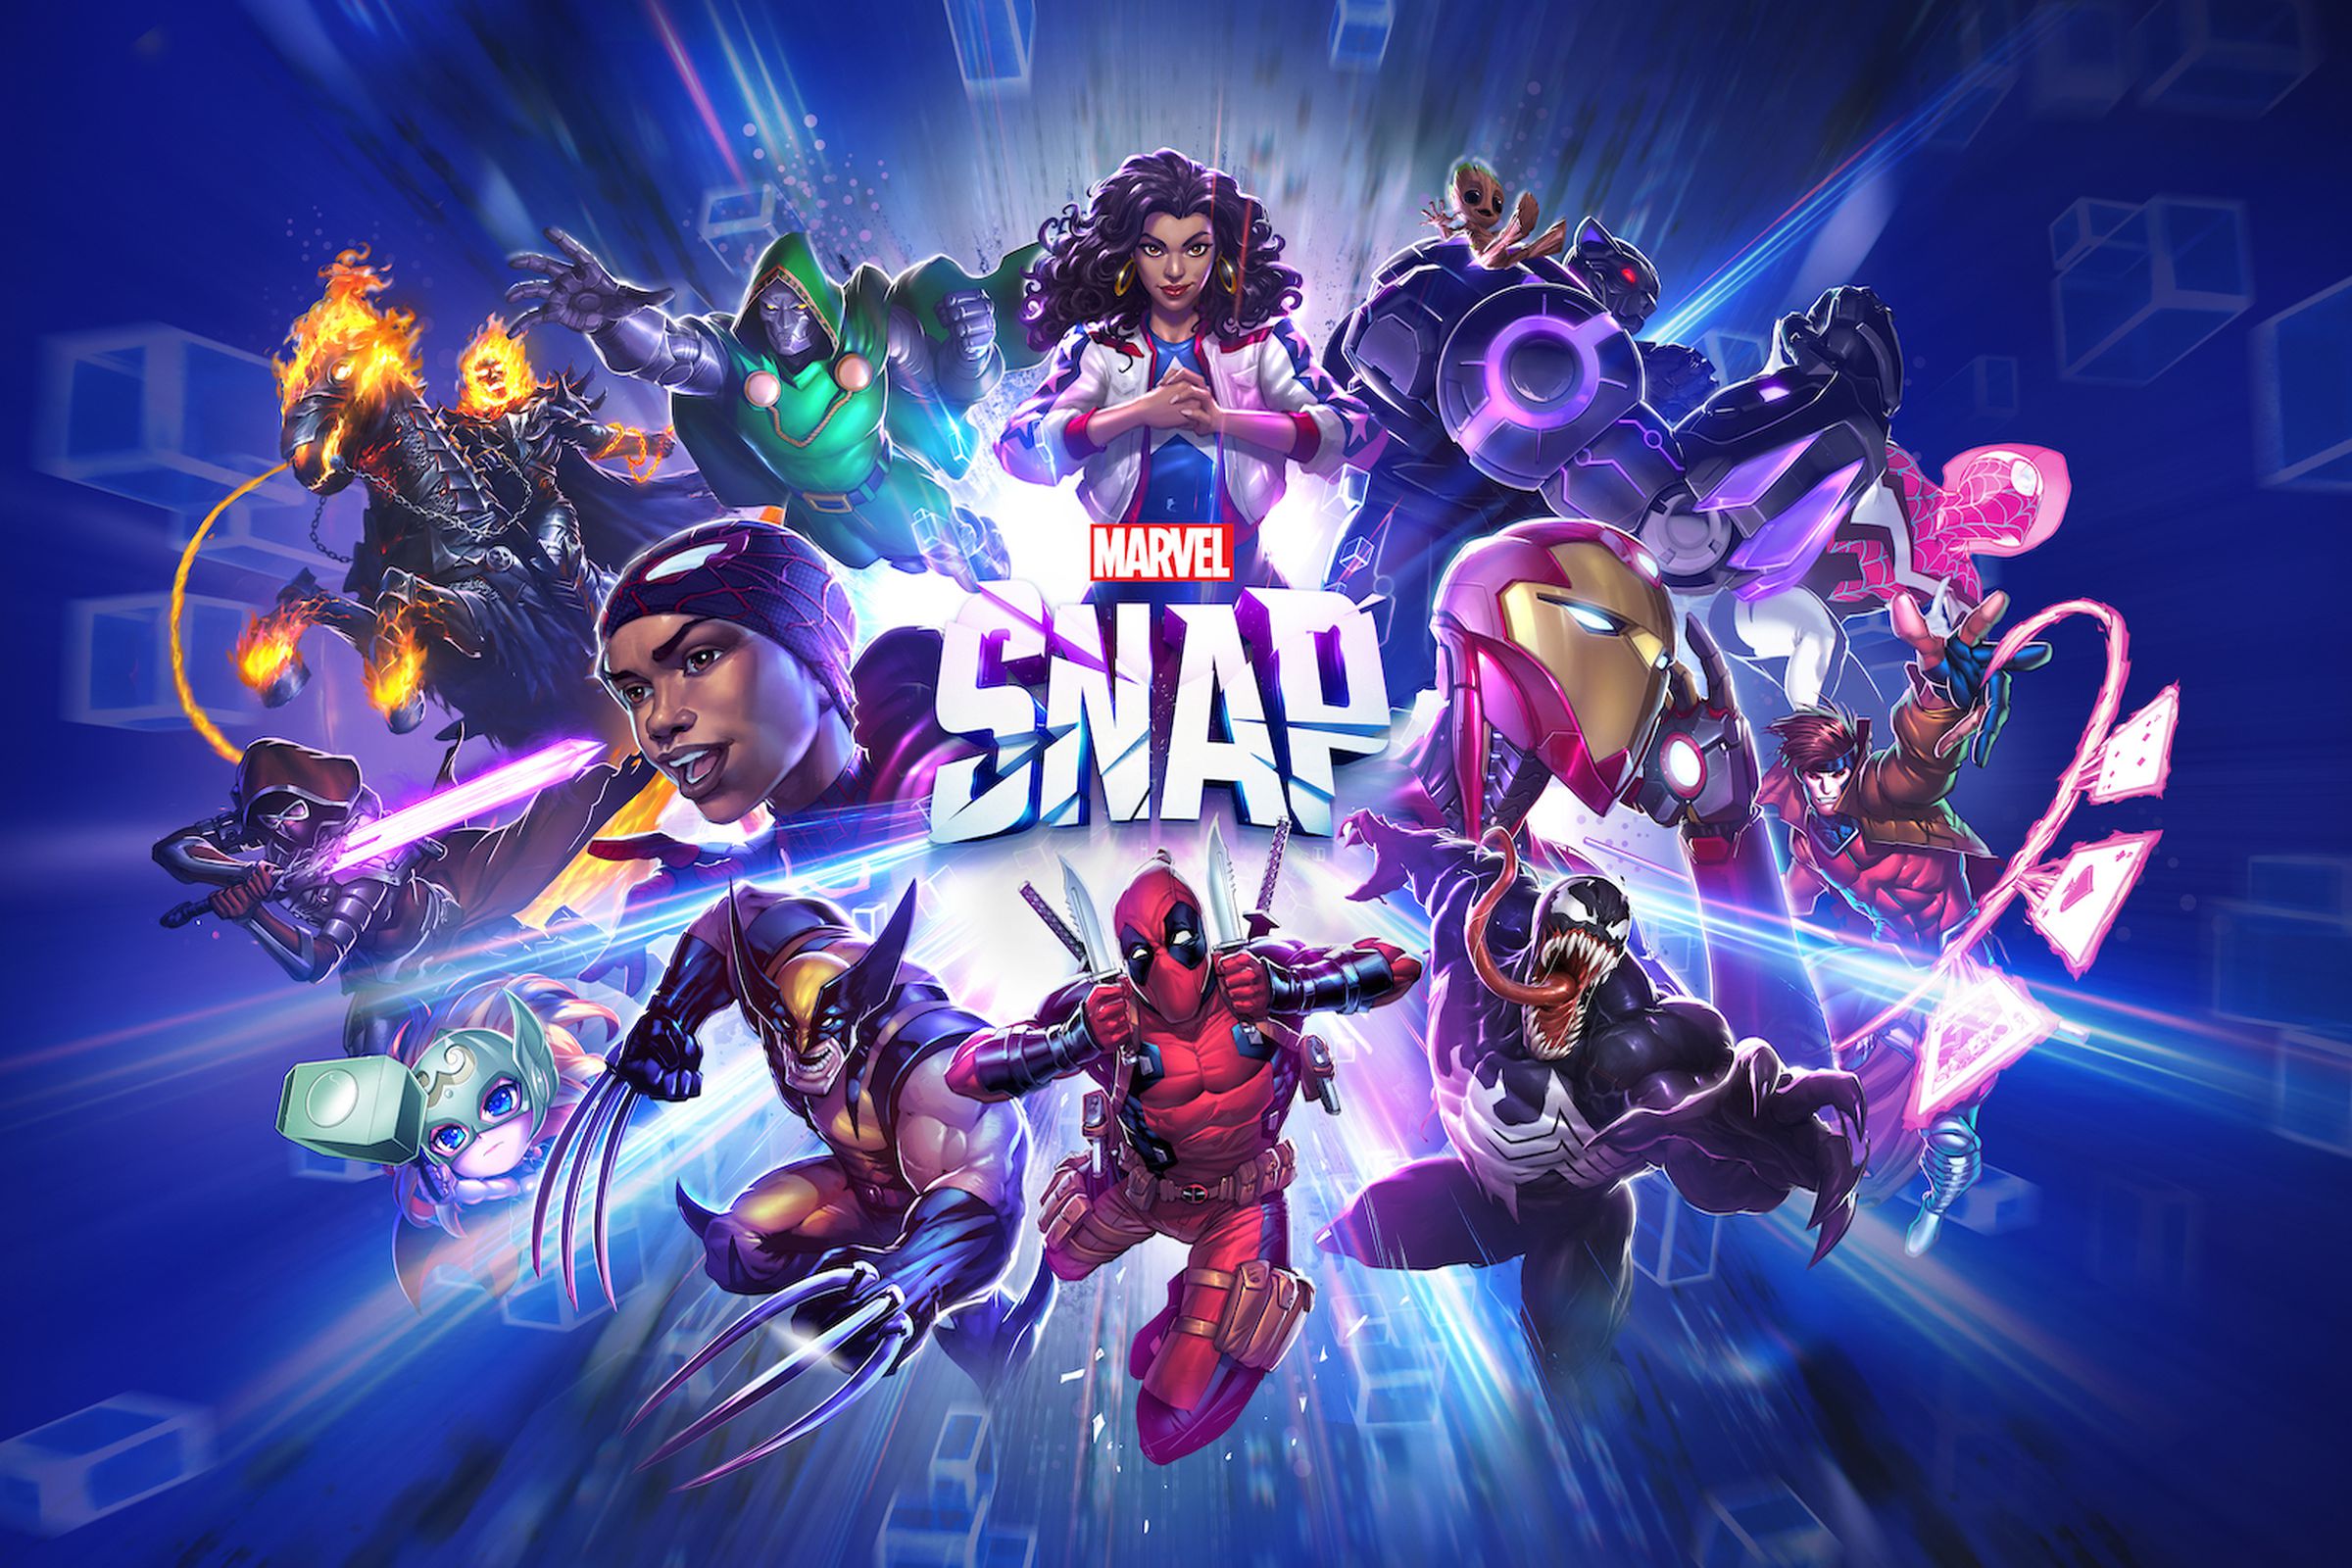 Graphic for Marvel Snap featuring a large group of Marvel superheroes radiating out from the Marvel Snap text at the center